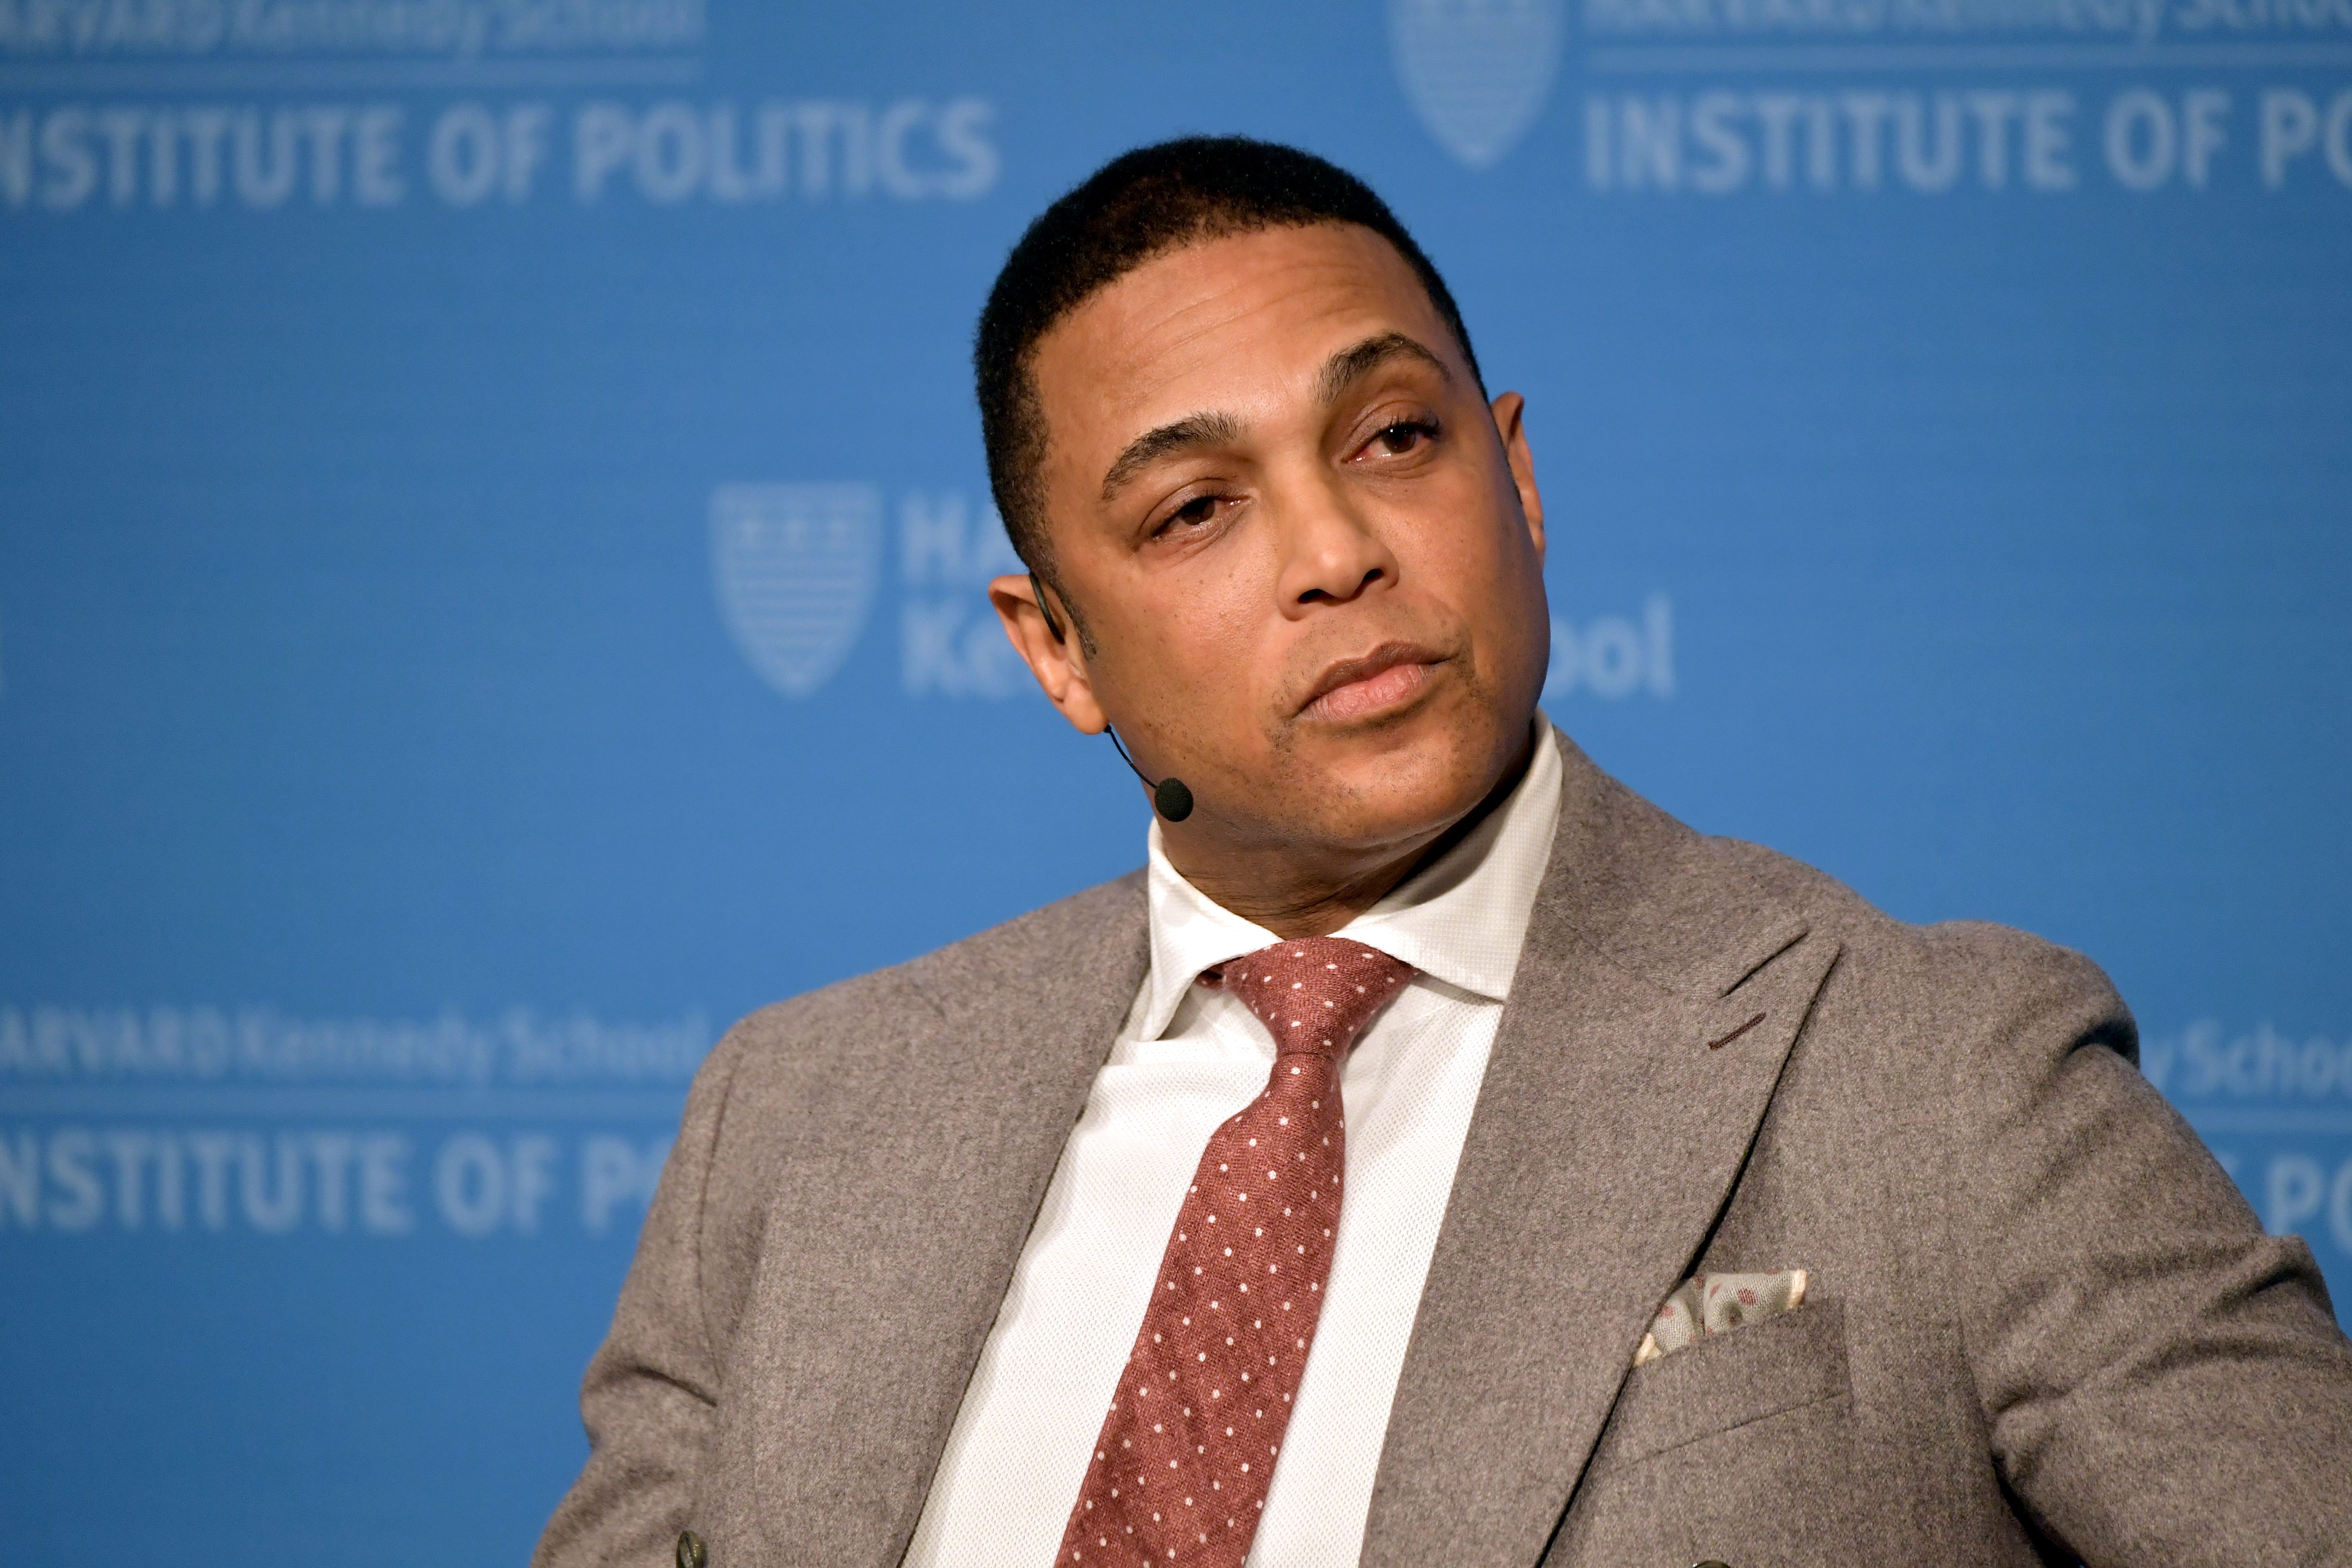 Don Lemon at Harvard University Kennedy School of Government Institute of Politics for a program titled "Race, Media and Politics" on February 22, 2019 | Photo: Getty Images